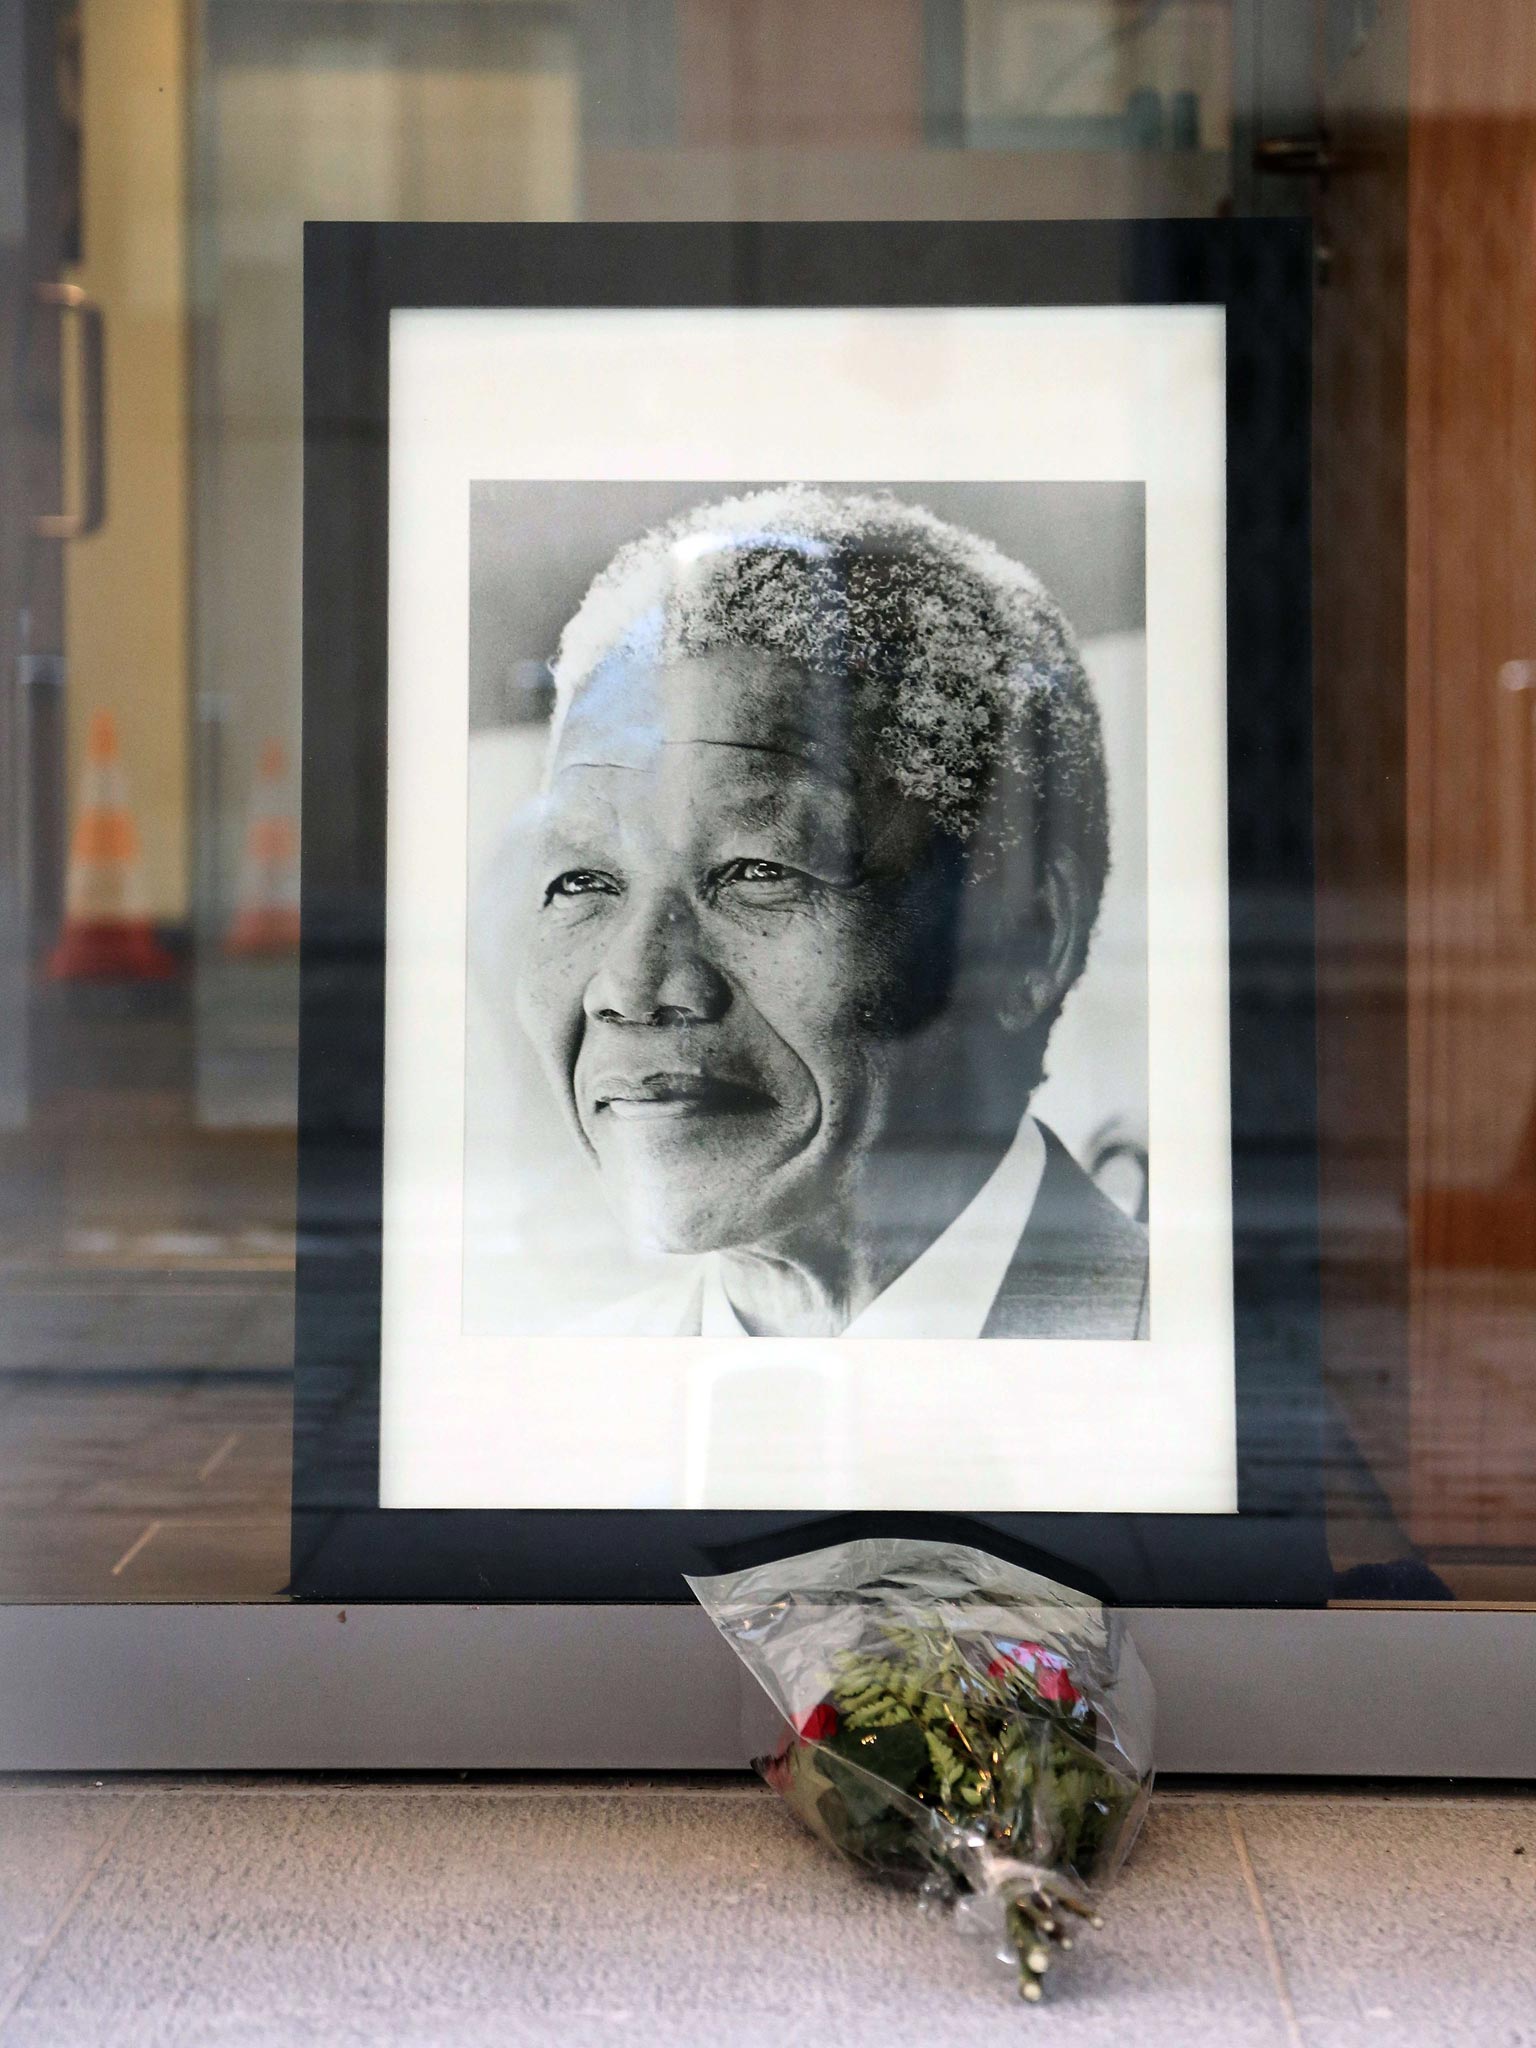 Flowers have been laid in front of a portrait of late Nelson Mandela at the front window of the South-Africa embassy in Brussels